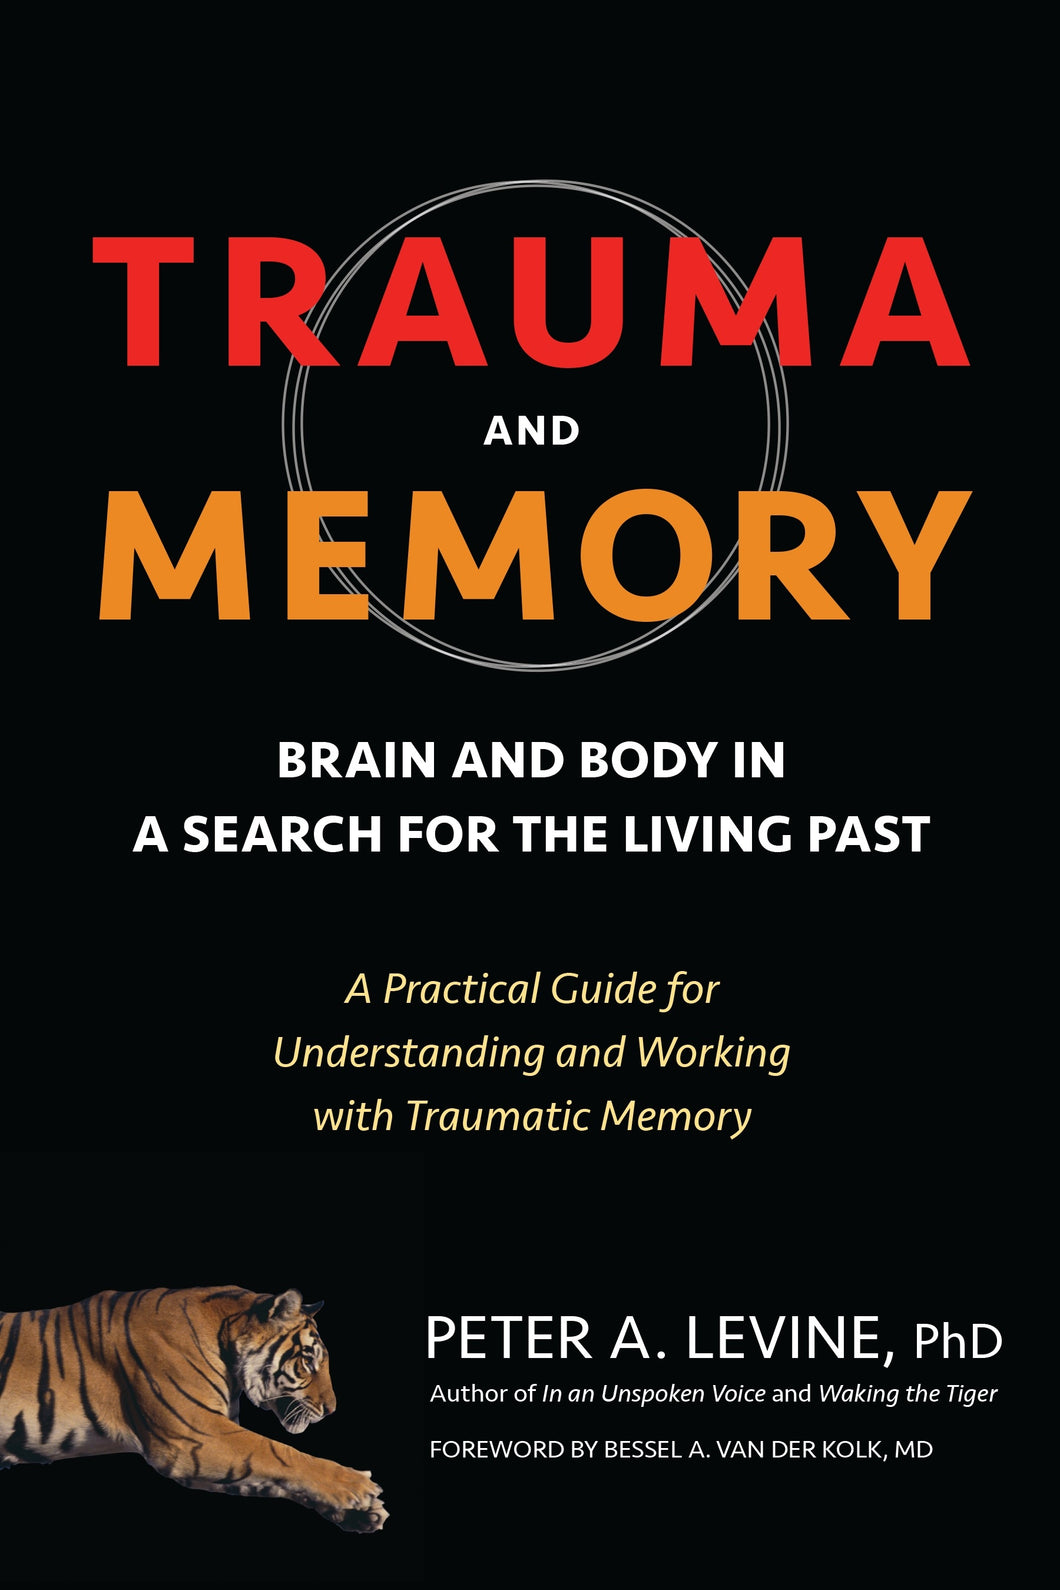 Trauma and Memory: Brain and Body in Search for the Living Past